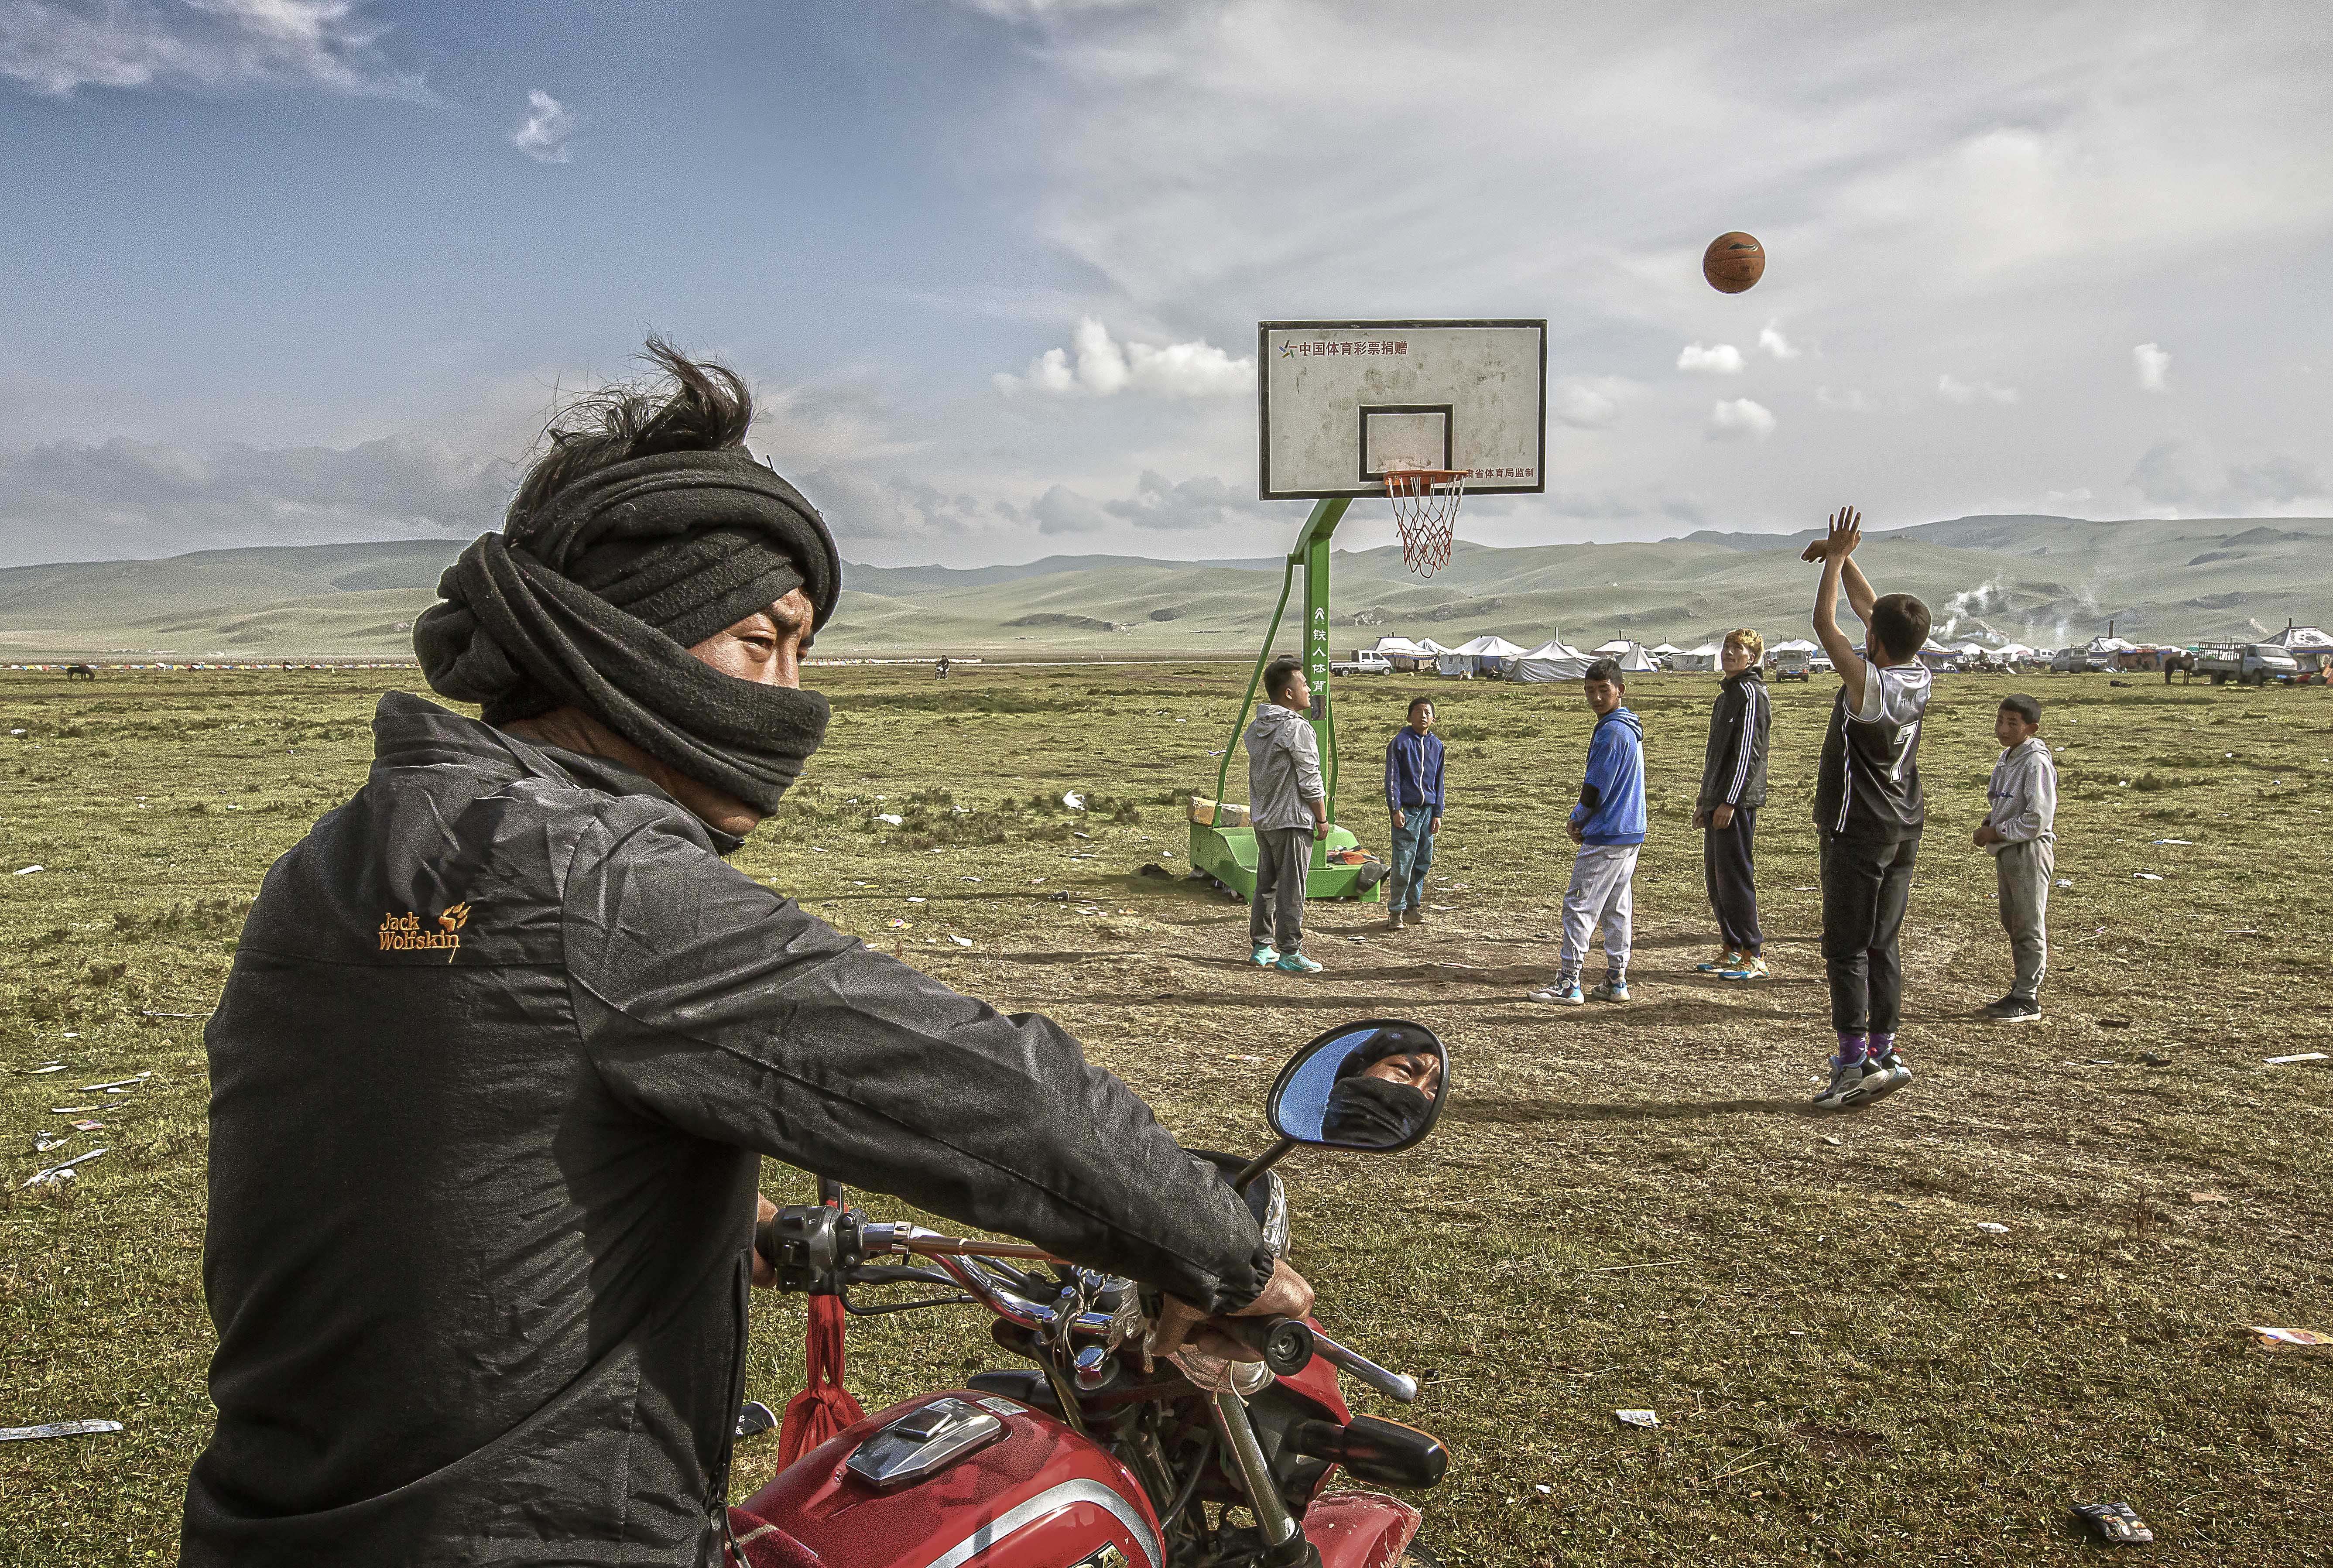 A man on a motorcycle in Tibet. Others play basketball in the background.